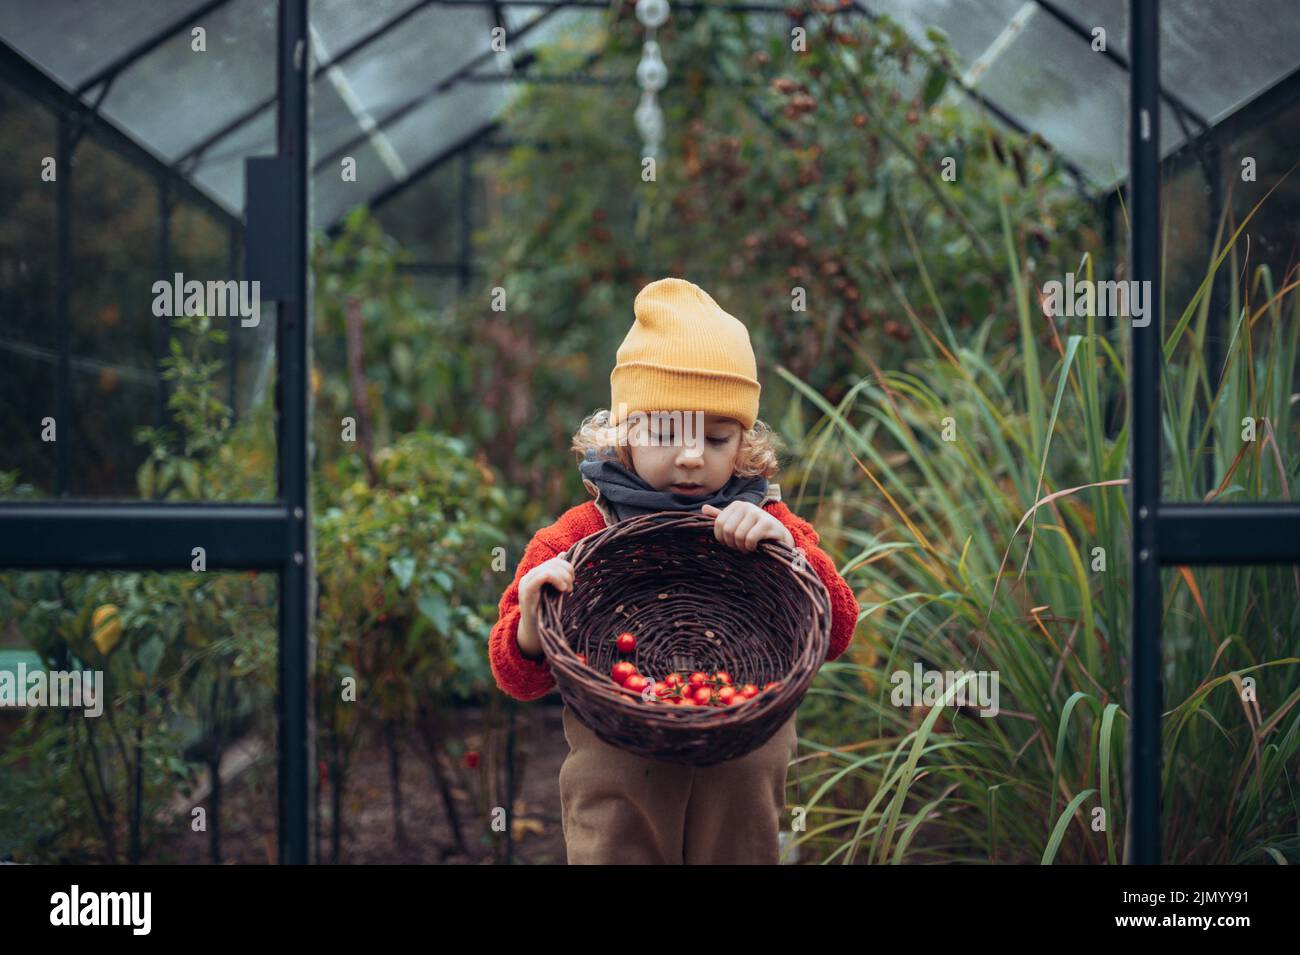 Little girl harvesting bio tomatoes in her basket in family greenhouse. Autumn atmosphere. Stock Photo